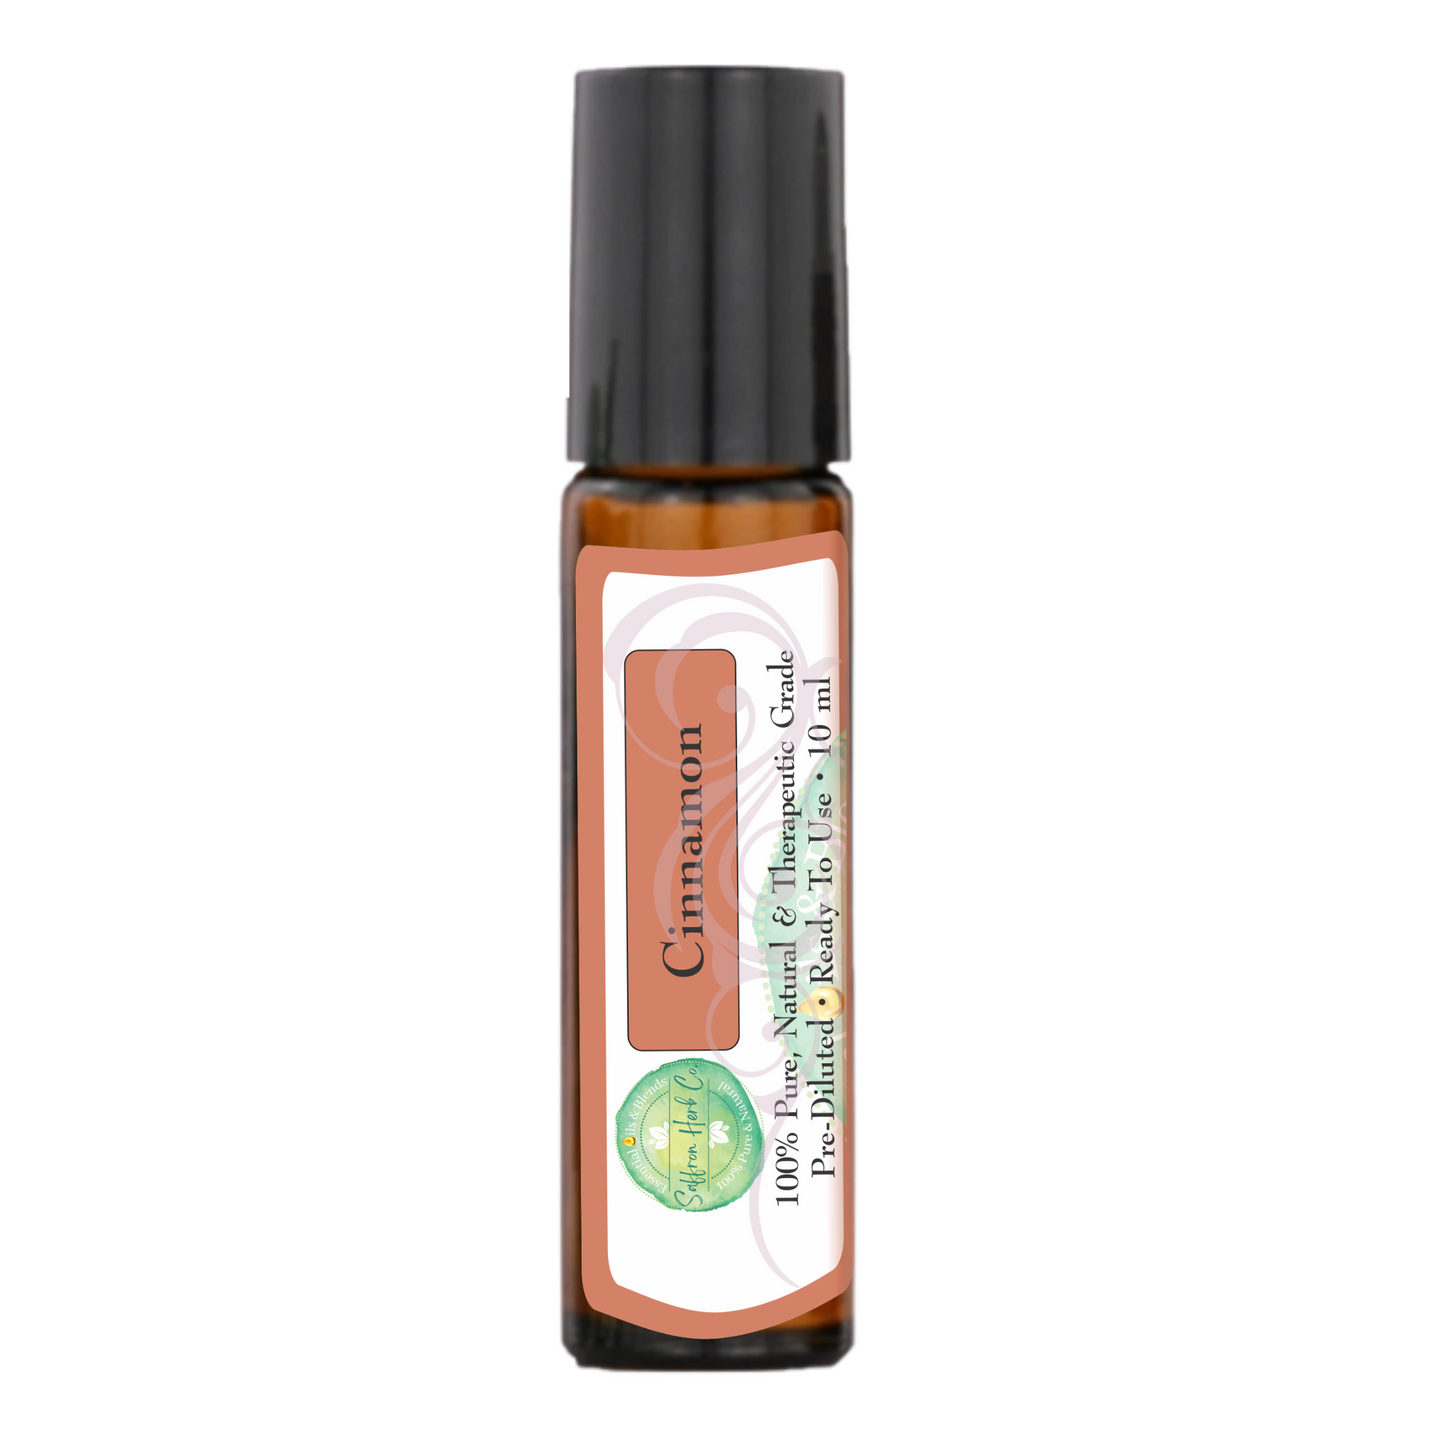 Cinnamon Essential Oil Roller Bottle Blend • 100% Pure & Natural • Pre-Diluted • Ready To Use